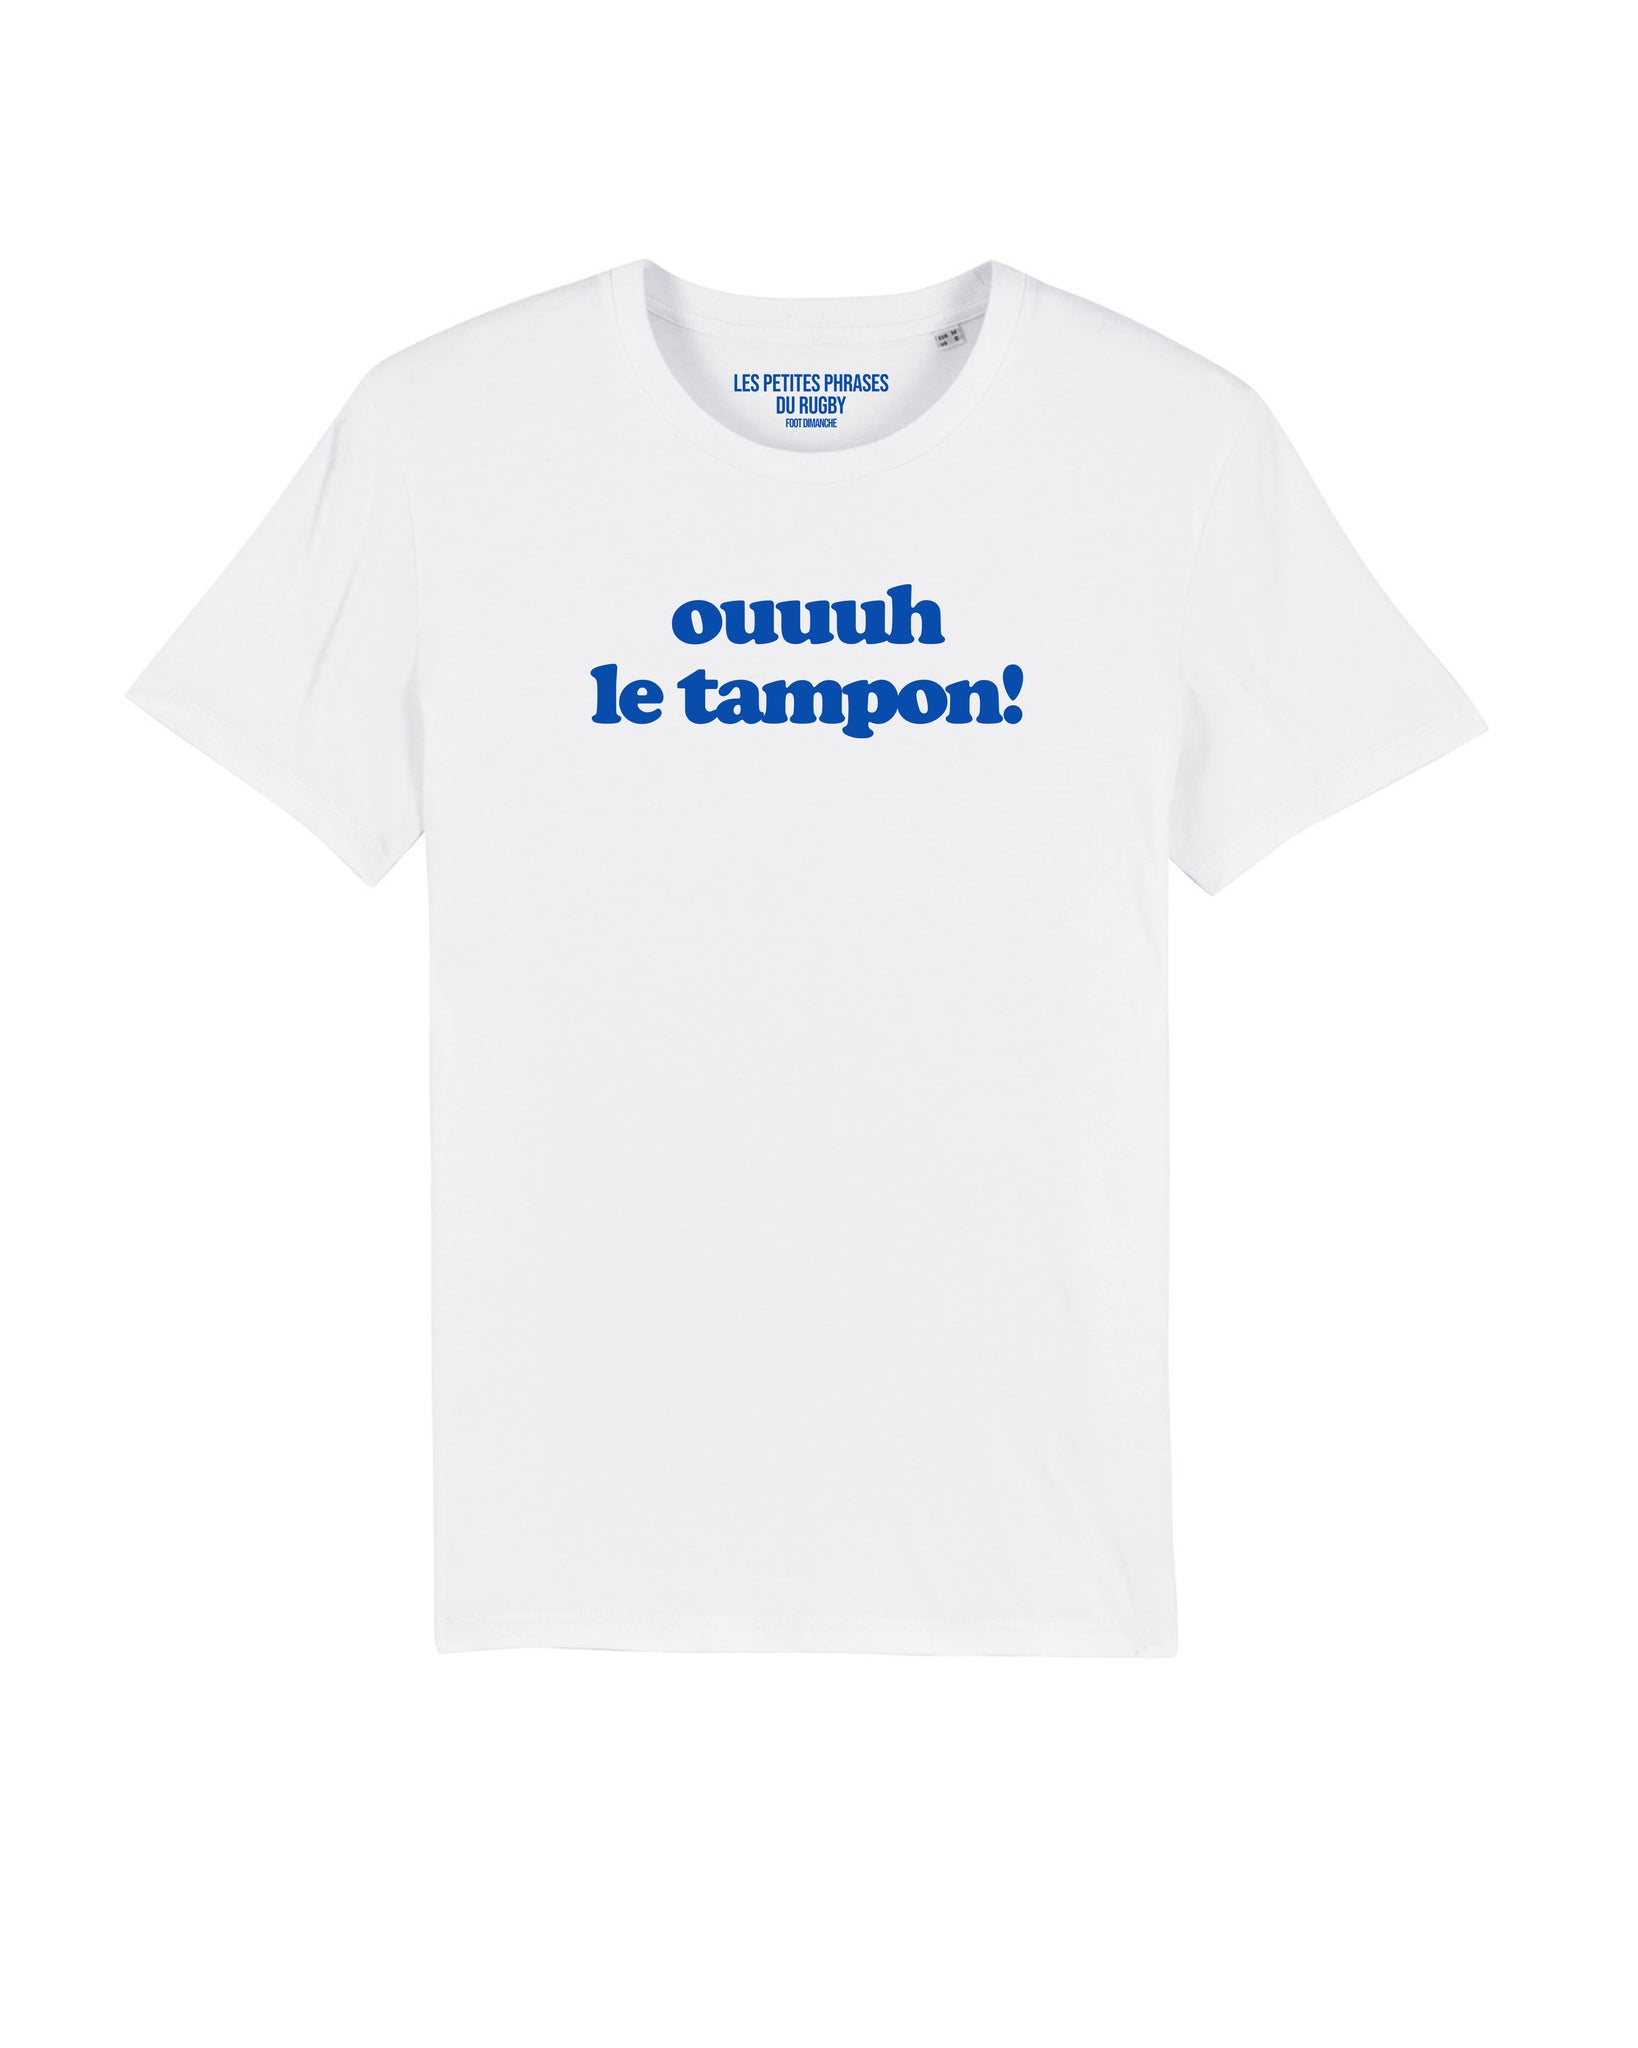 Tee Shirt Tampon Rugby